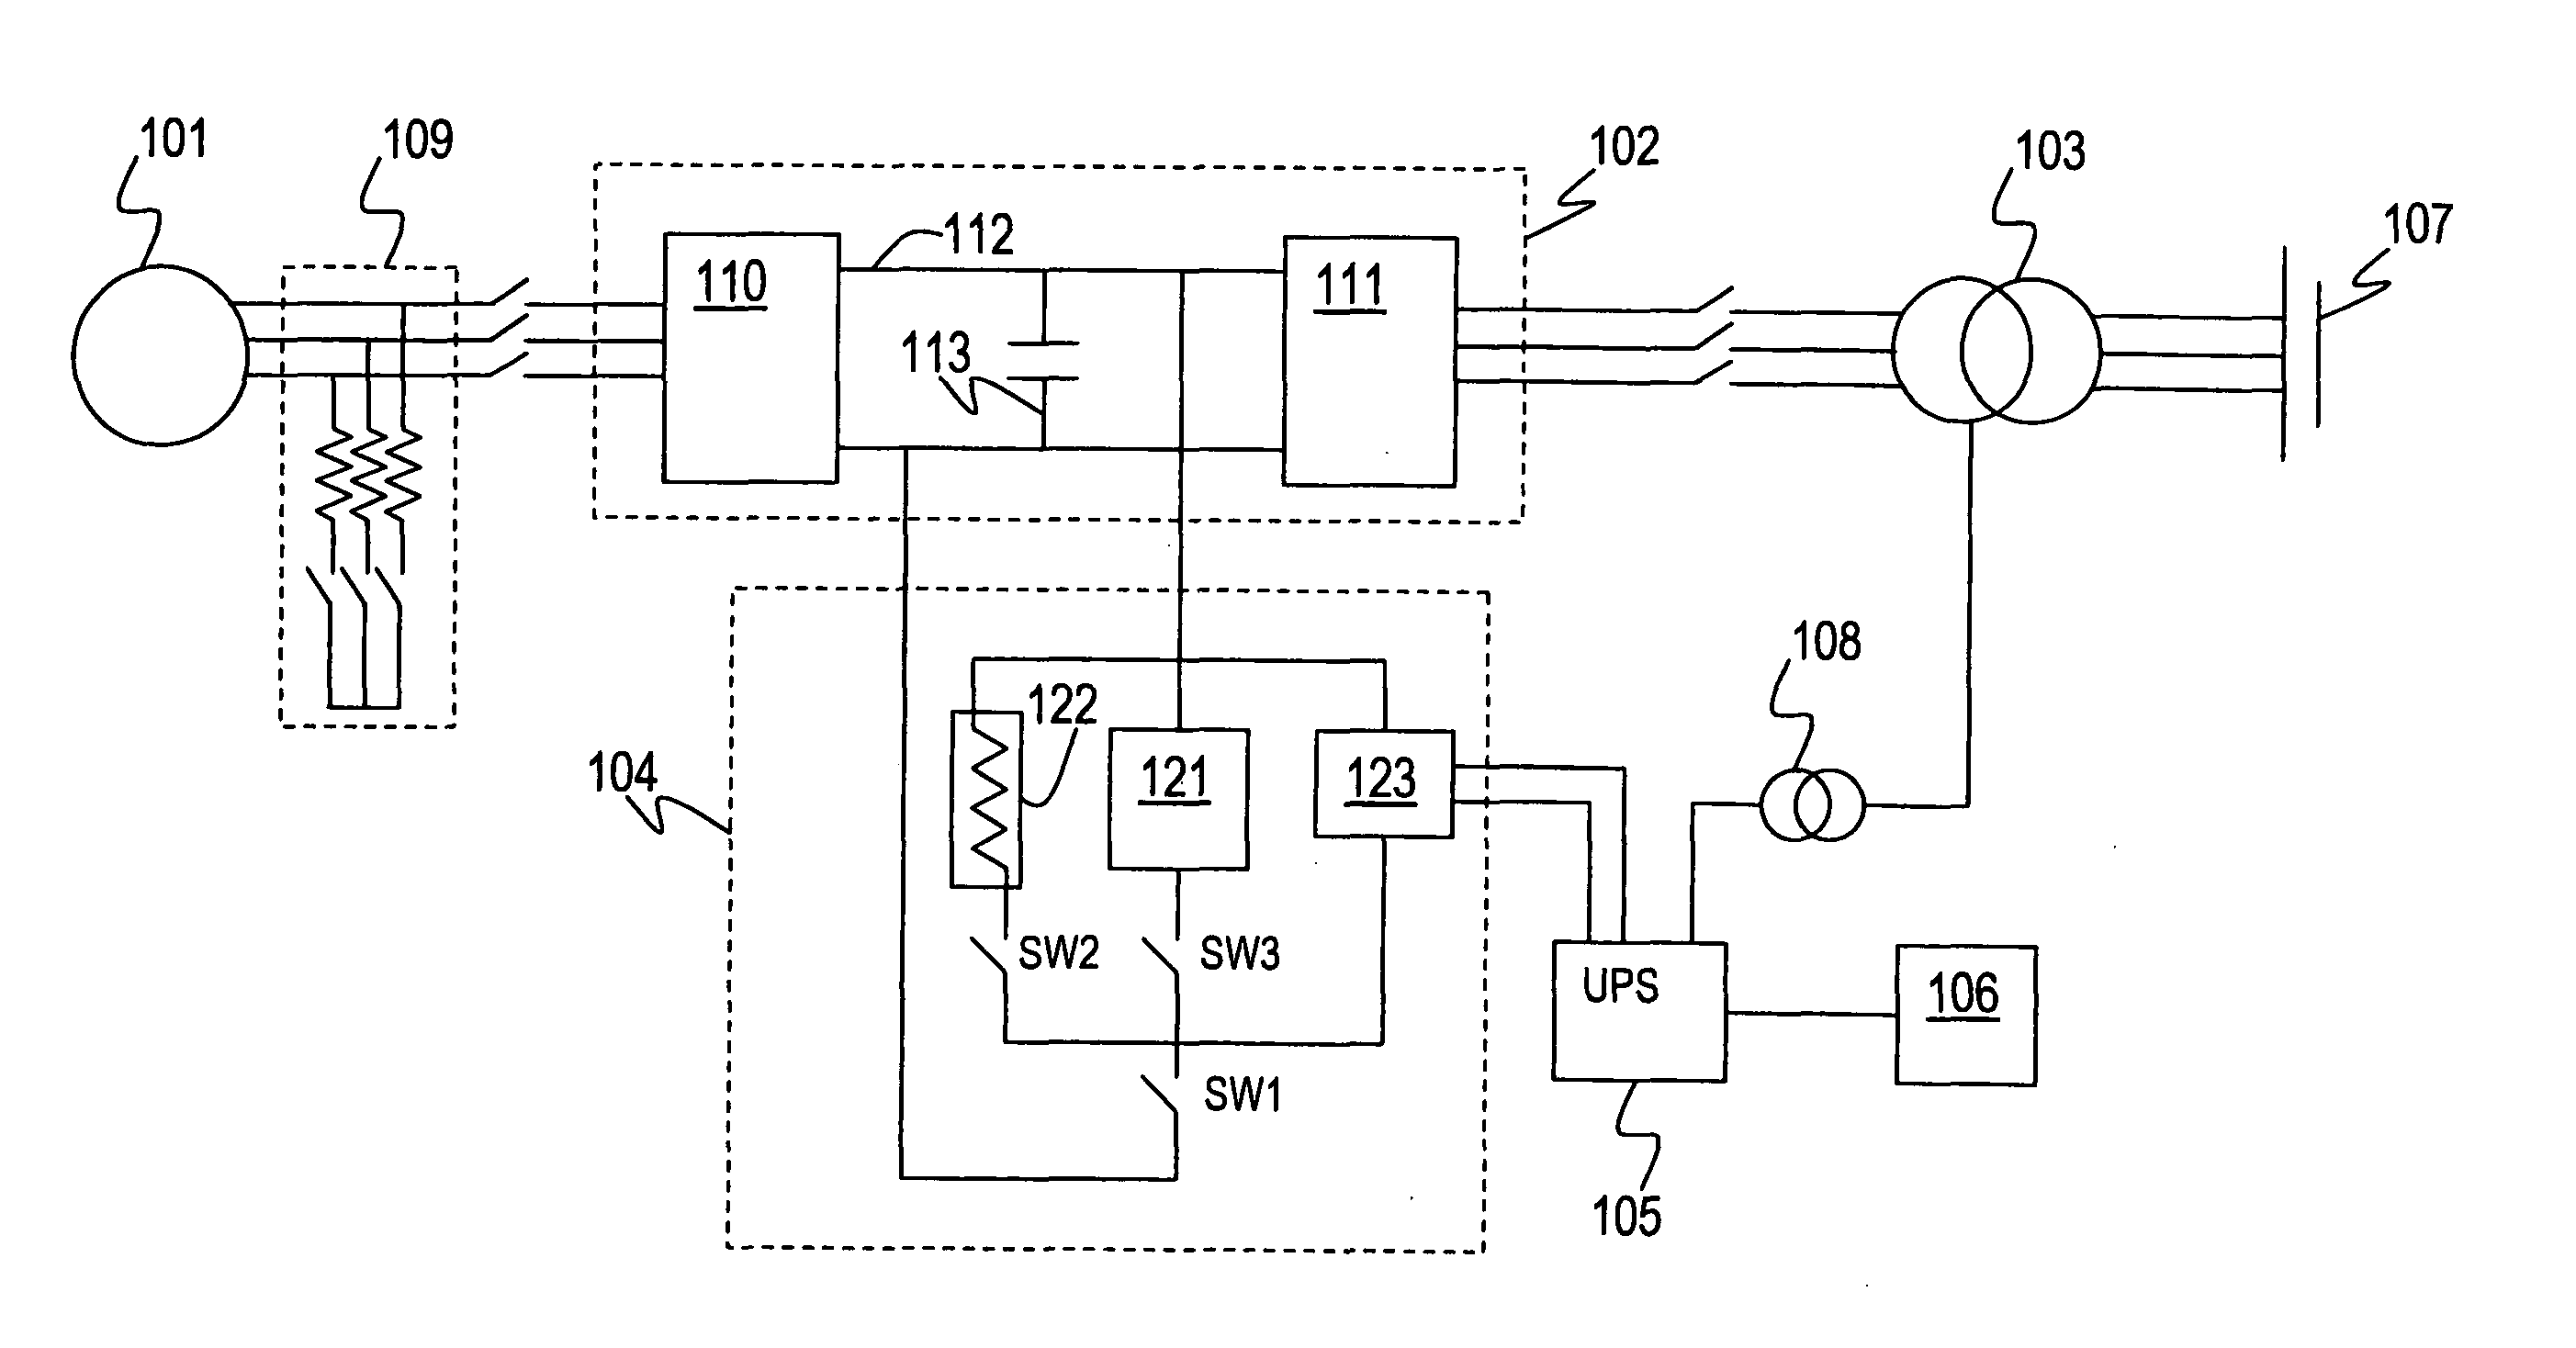 Variable speed wind turbine, and a method for operating the variable speed wind turbine during a power imbalance event